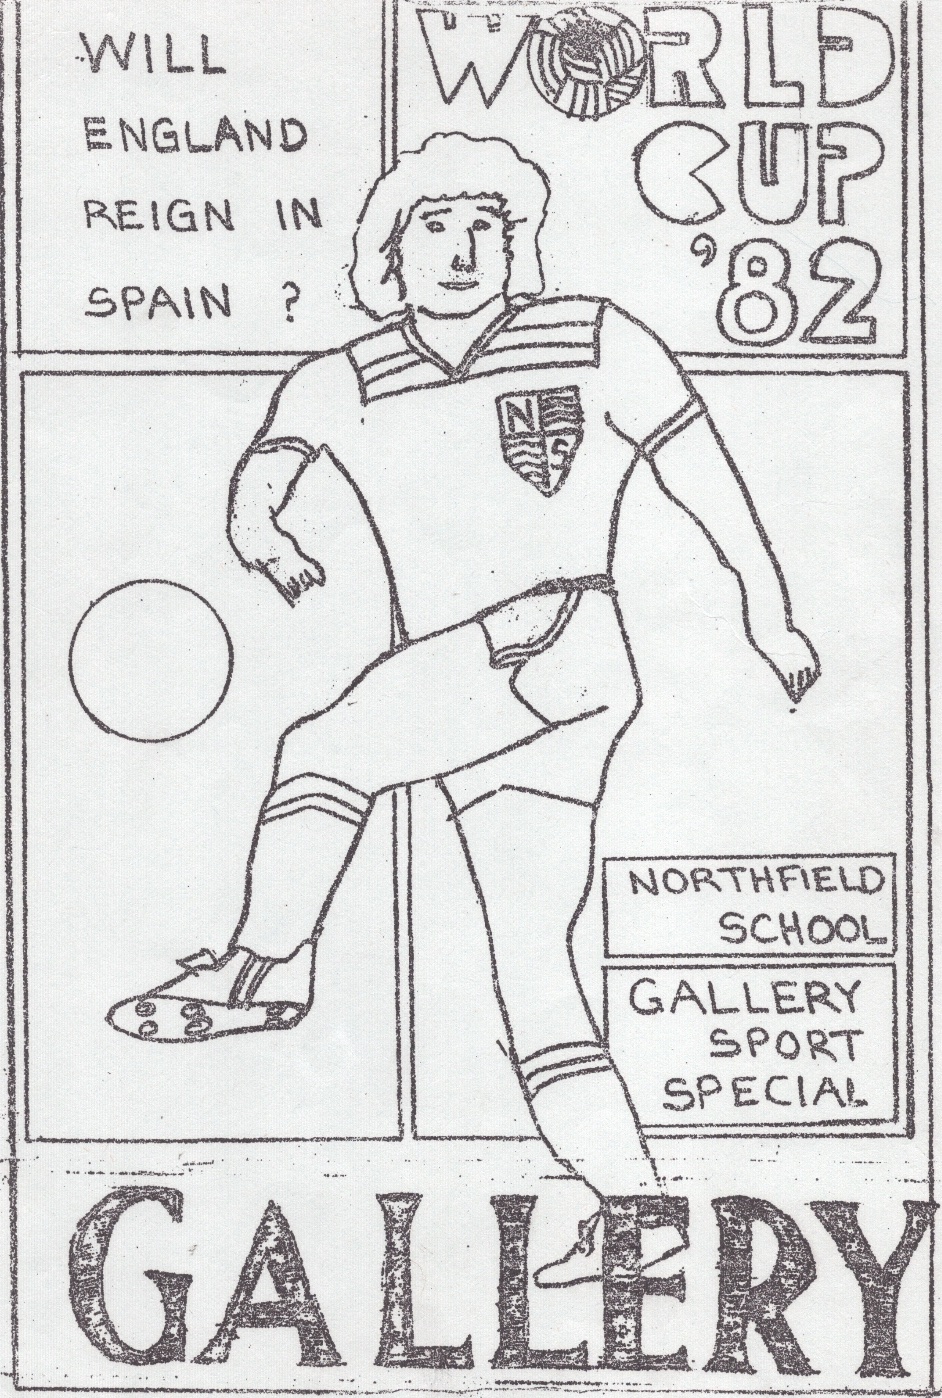 Northfield School's newspaper from June 1982: World Cup '82 issue